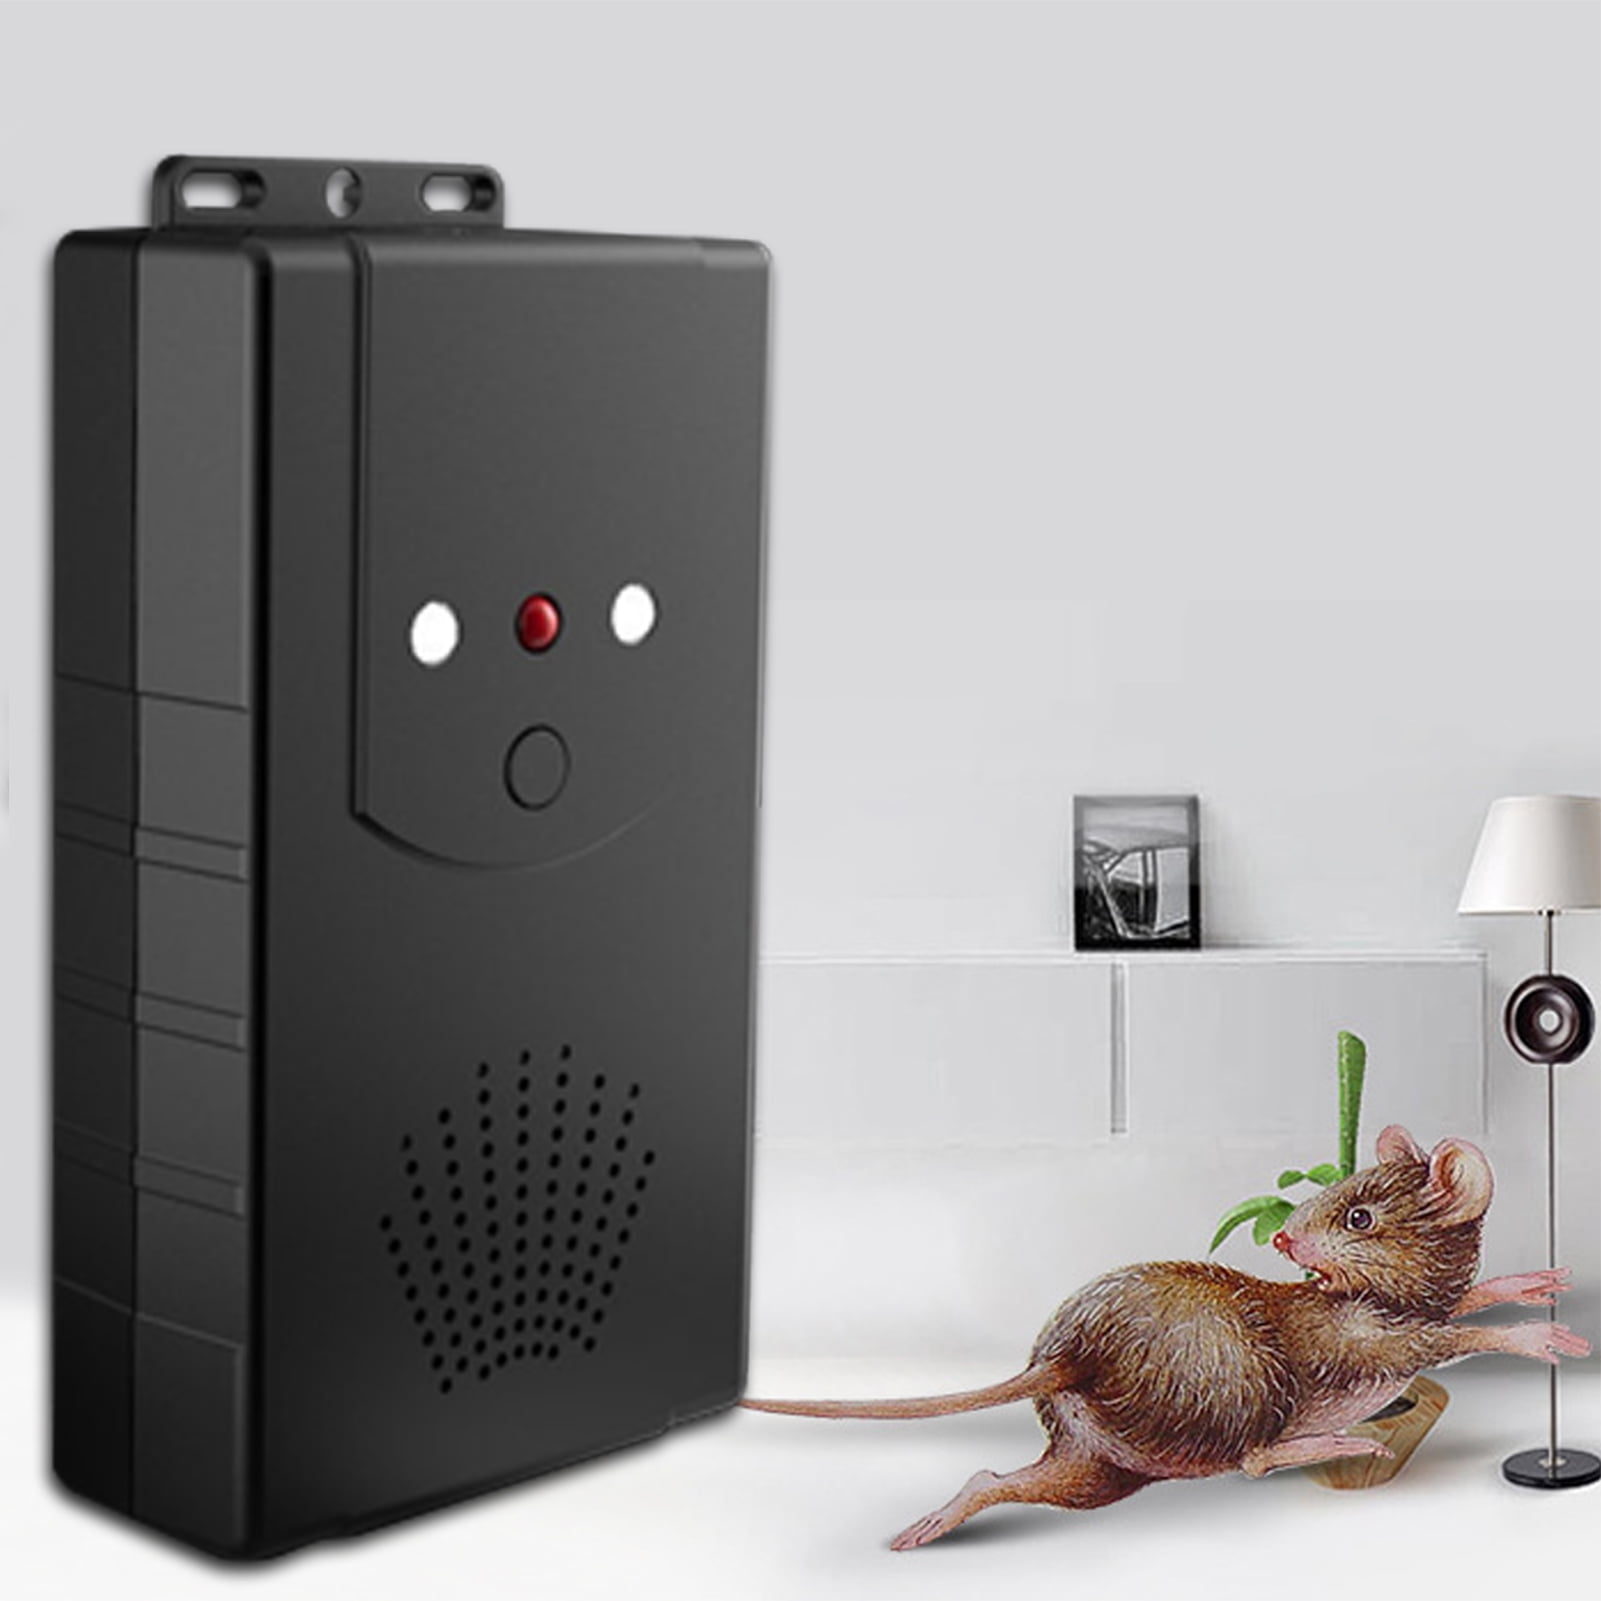 Mairbeon 1 Set Rodent Repellent USB/Battery Powered Ultrasonic